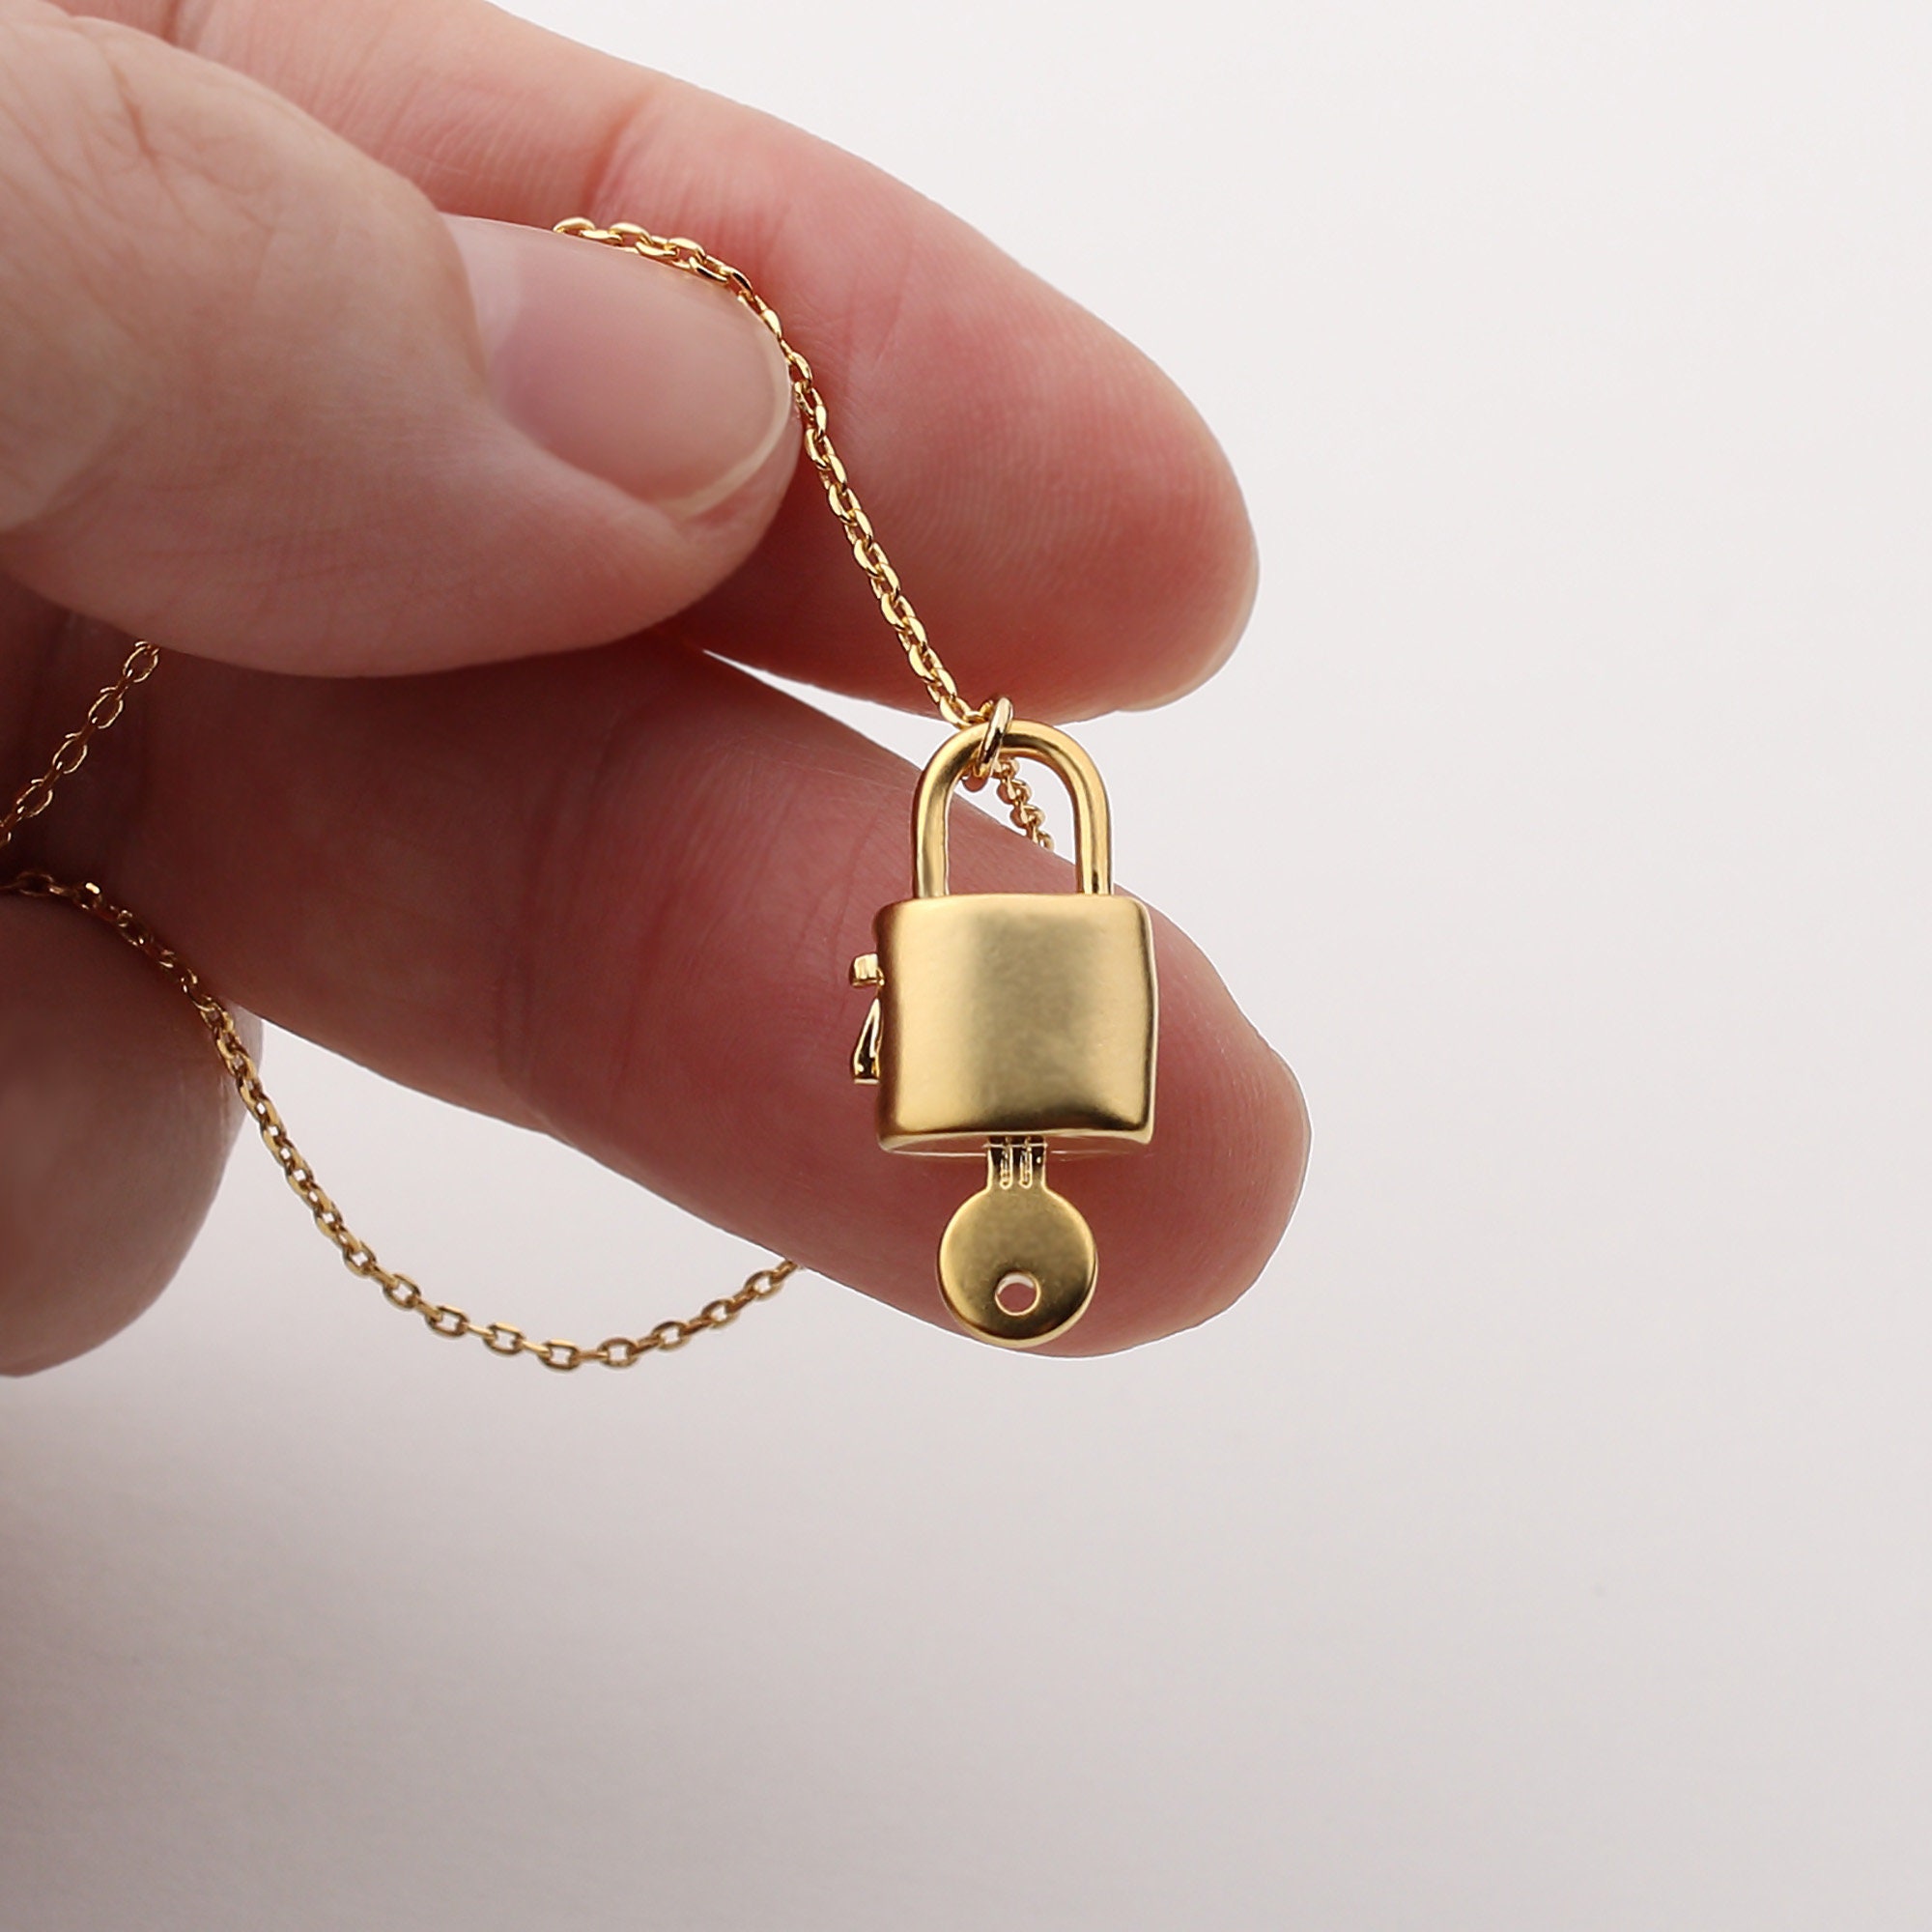 Gold Lock and Key Fob Necklace, Gold LV Lock and Key Vintage Textured Oval Cable Chain Add on Lock/Key